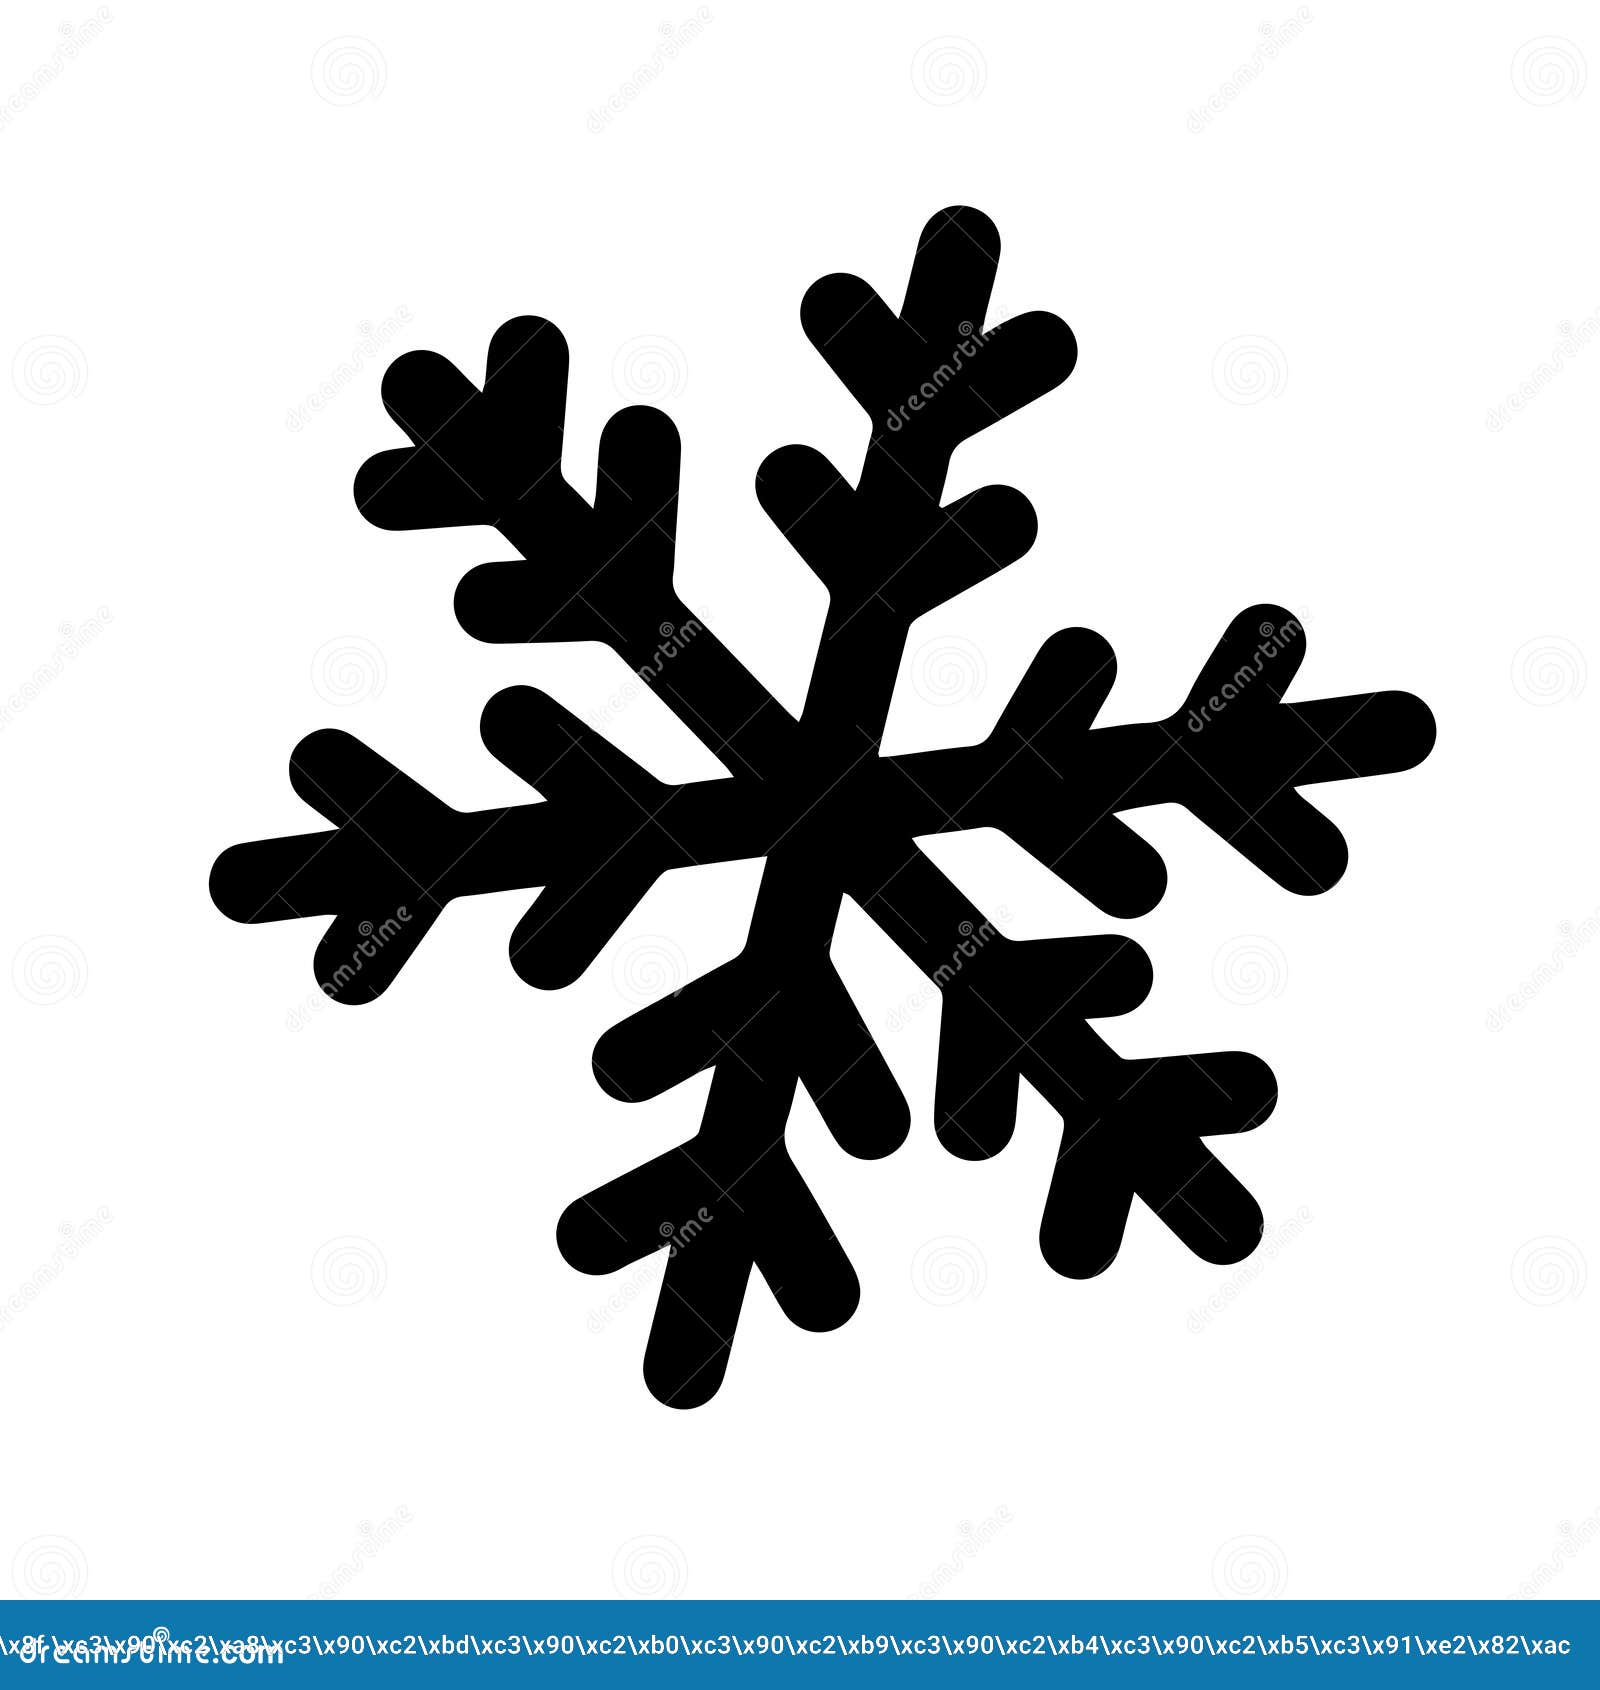 Hand Drawn Snowflakes Vector Art, Icons, and Graphics for Free Download